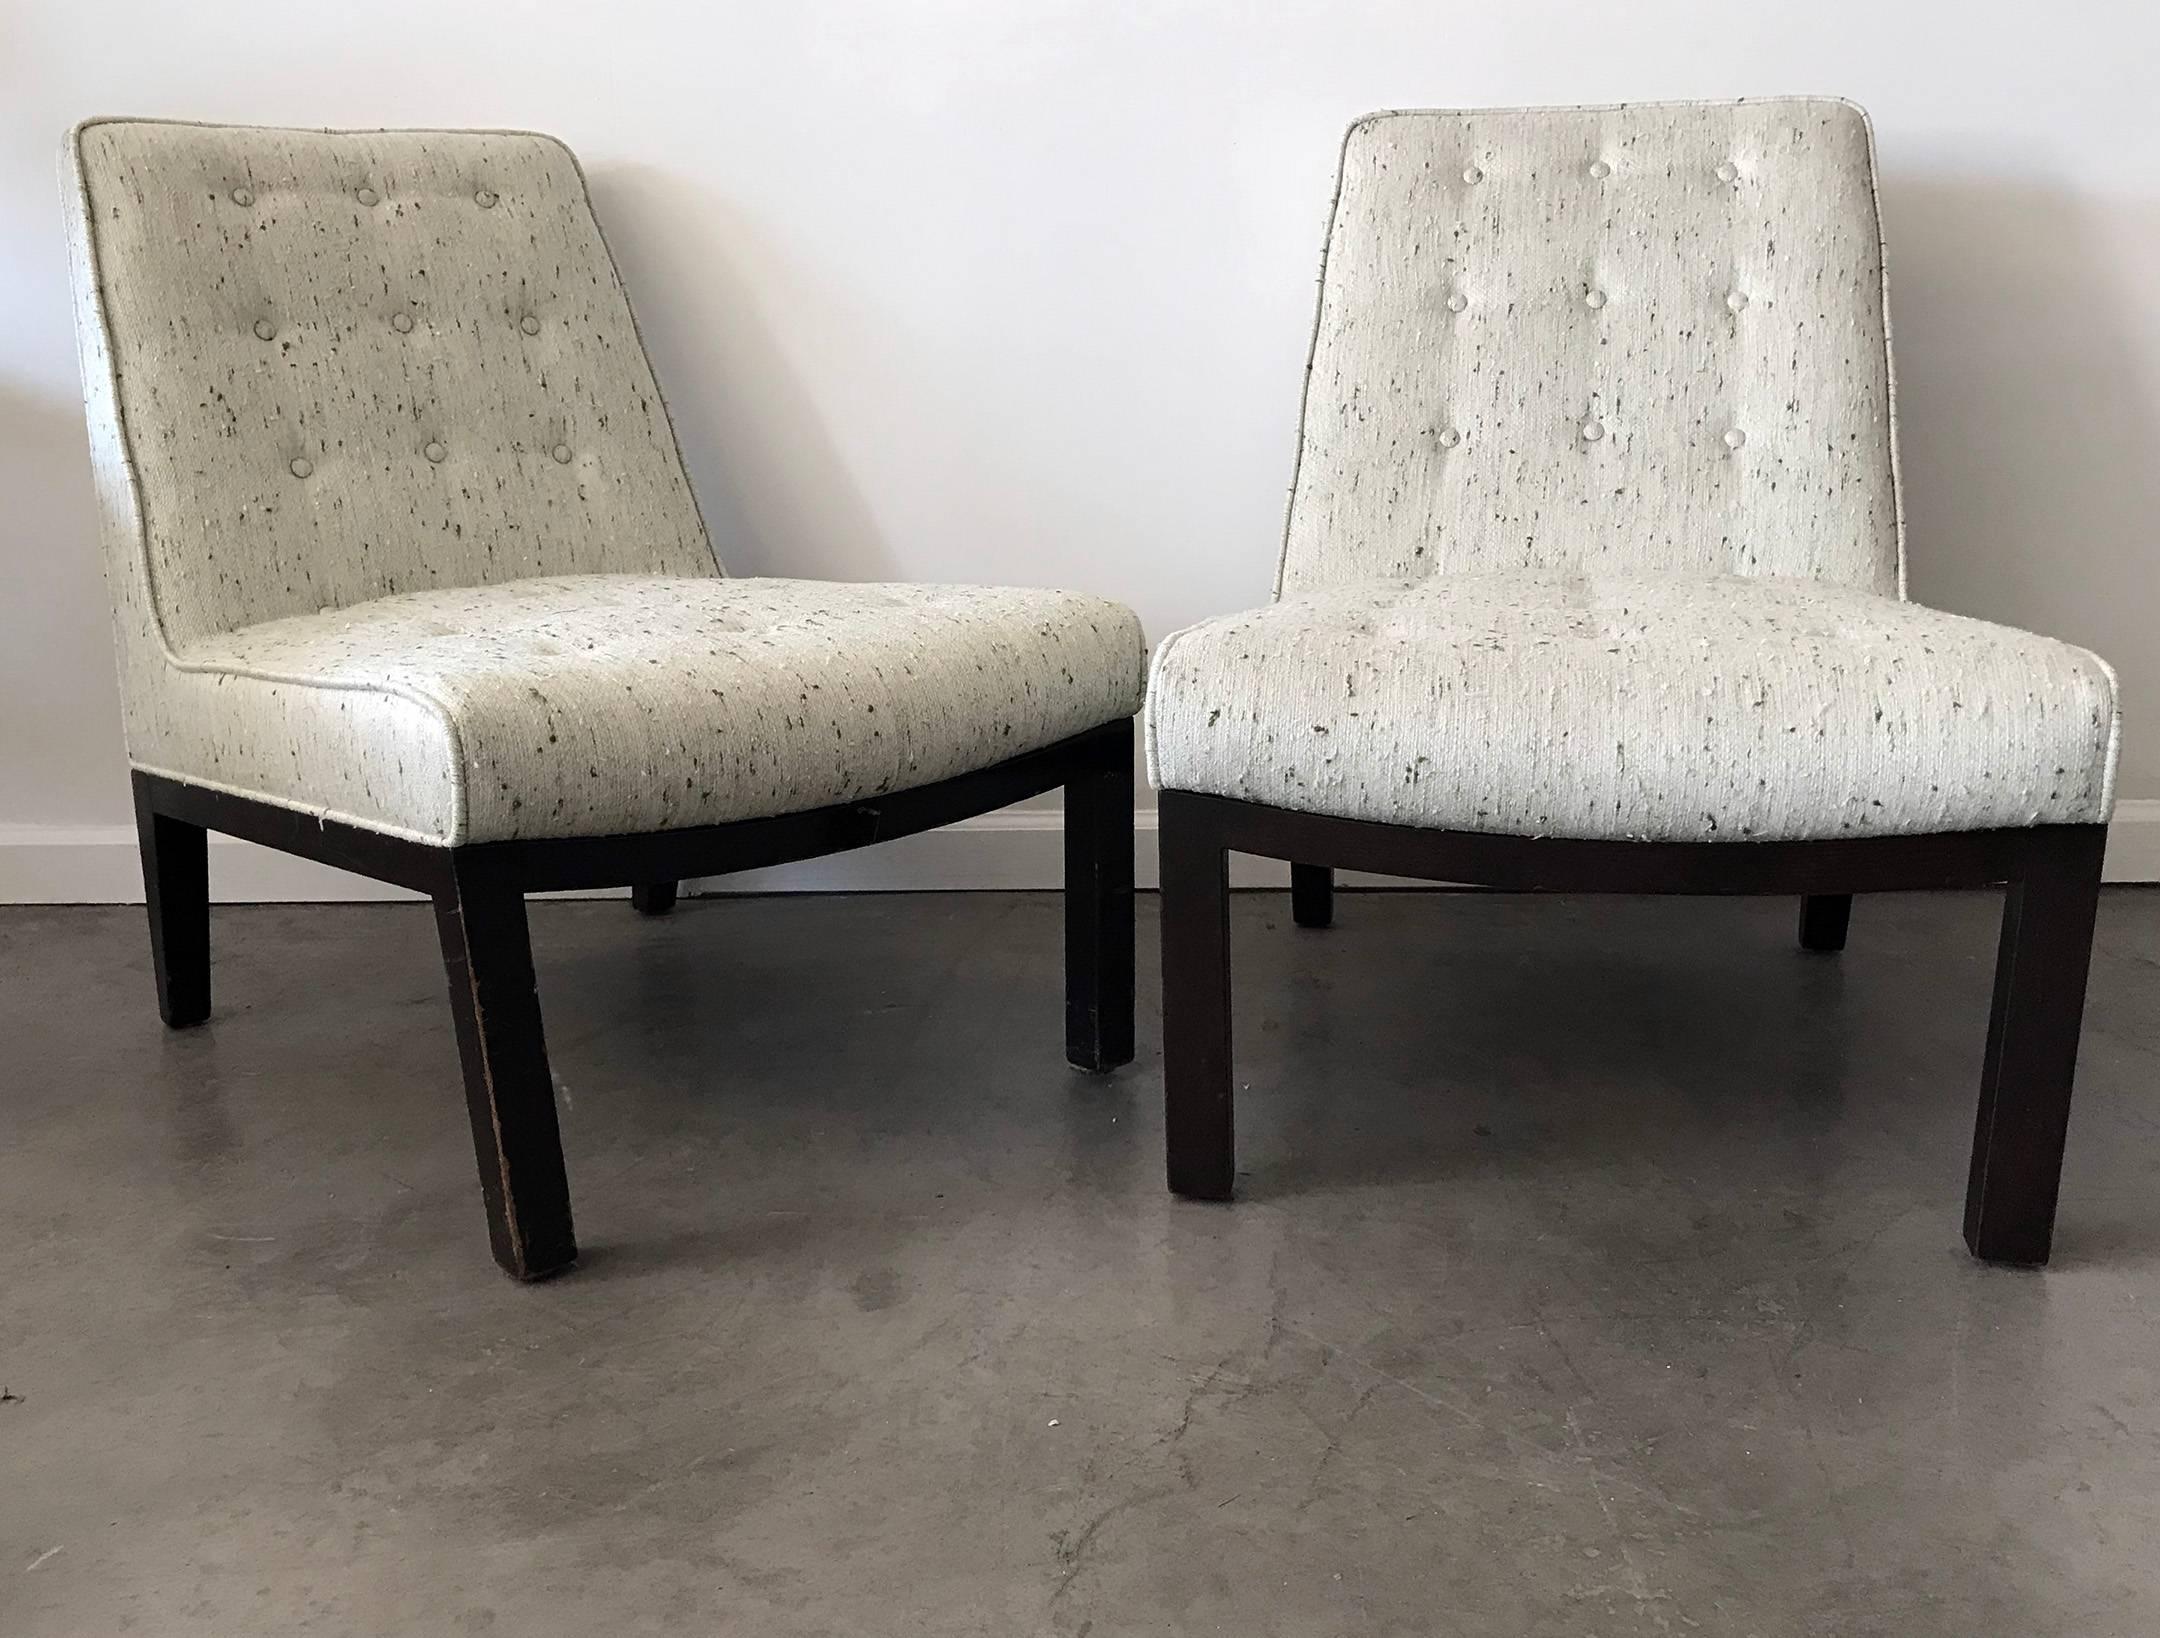 Mid-20th Century Pair of Edward Wormley Slipper Chairs for Dunbar